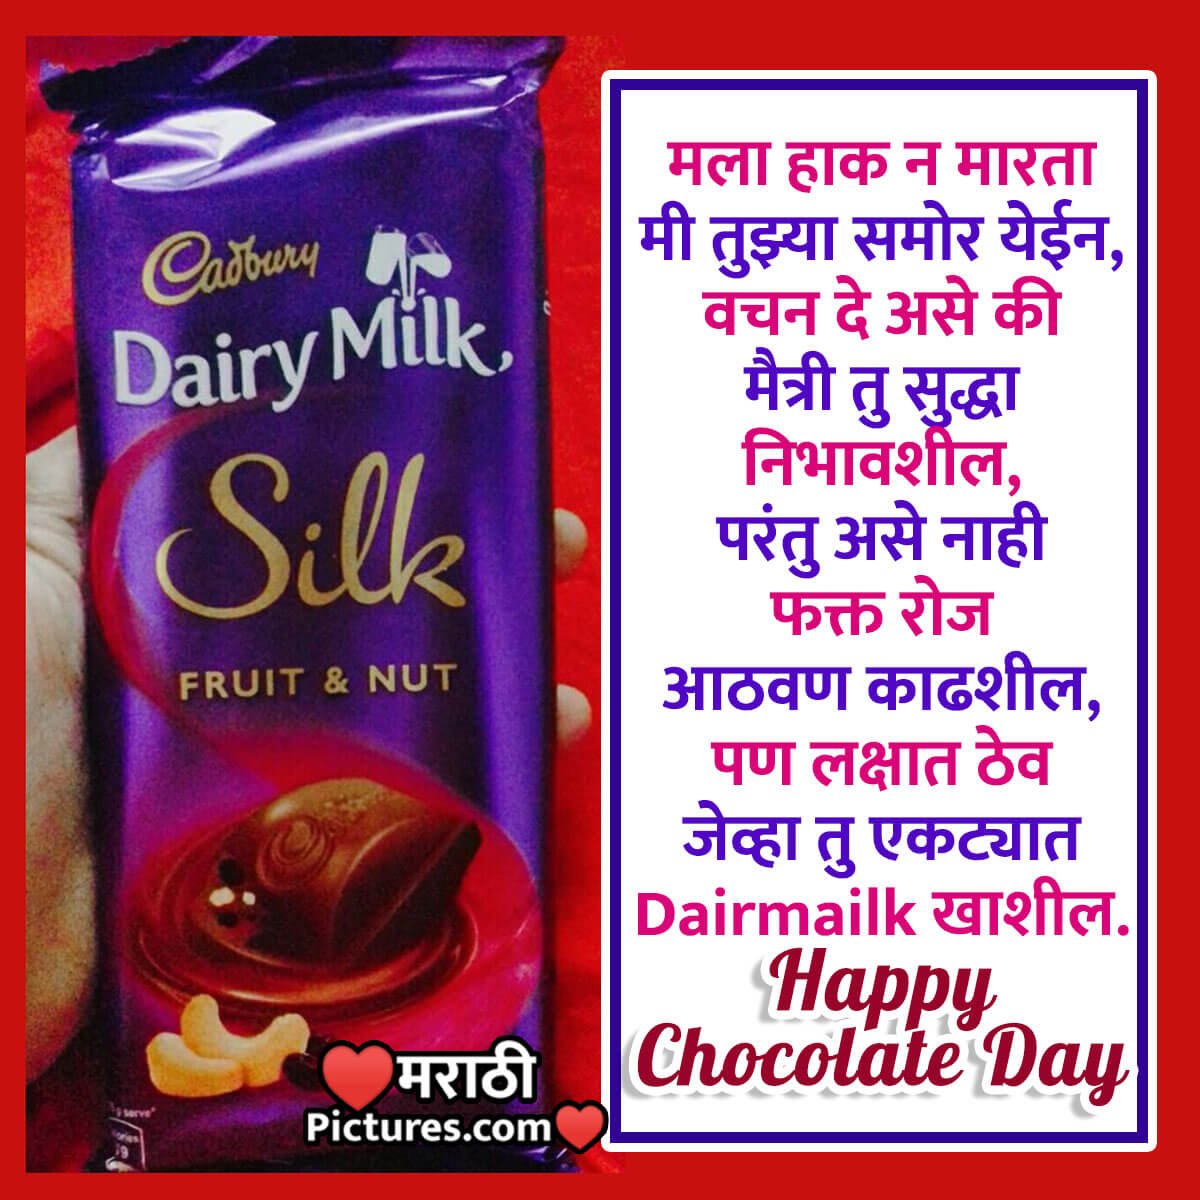 Happy Chocolate Day Marathi Quote For Friend